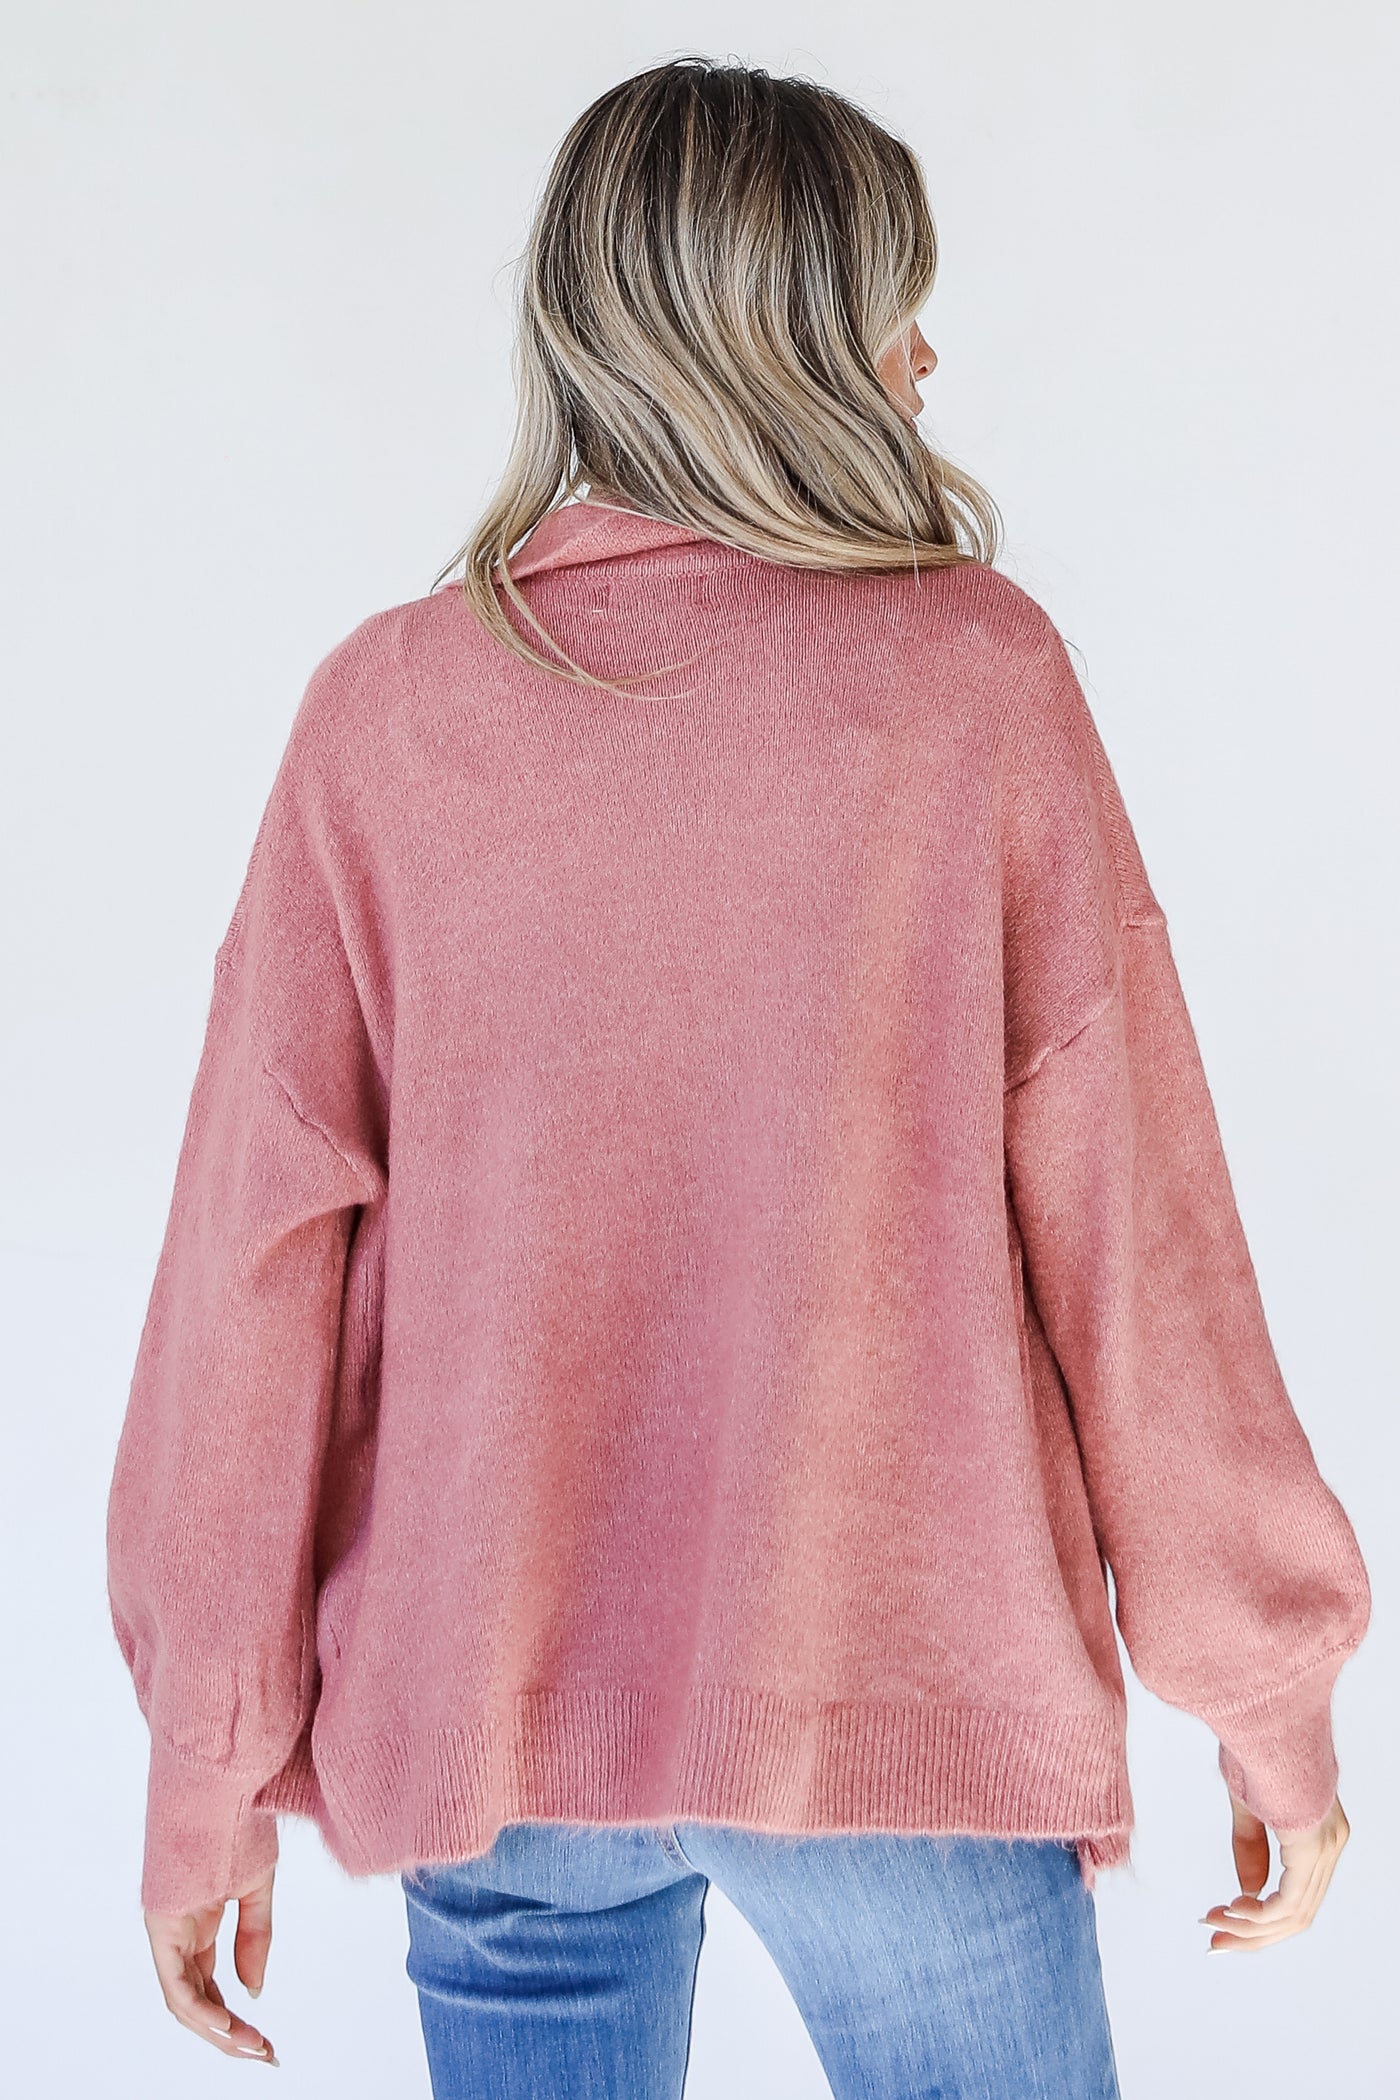 Sweater Cardigan in mauve back view